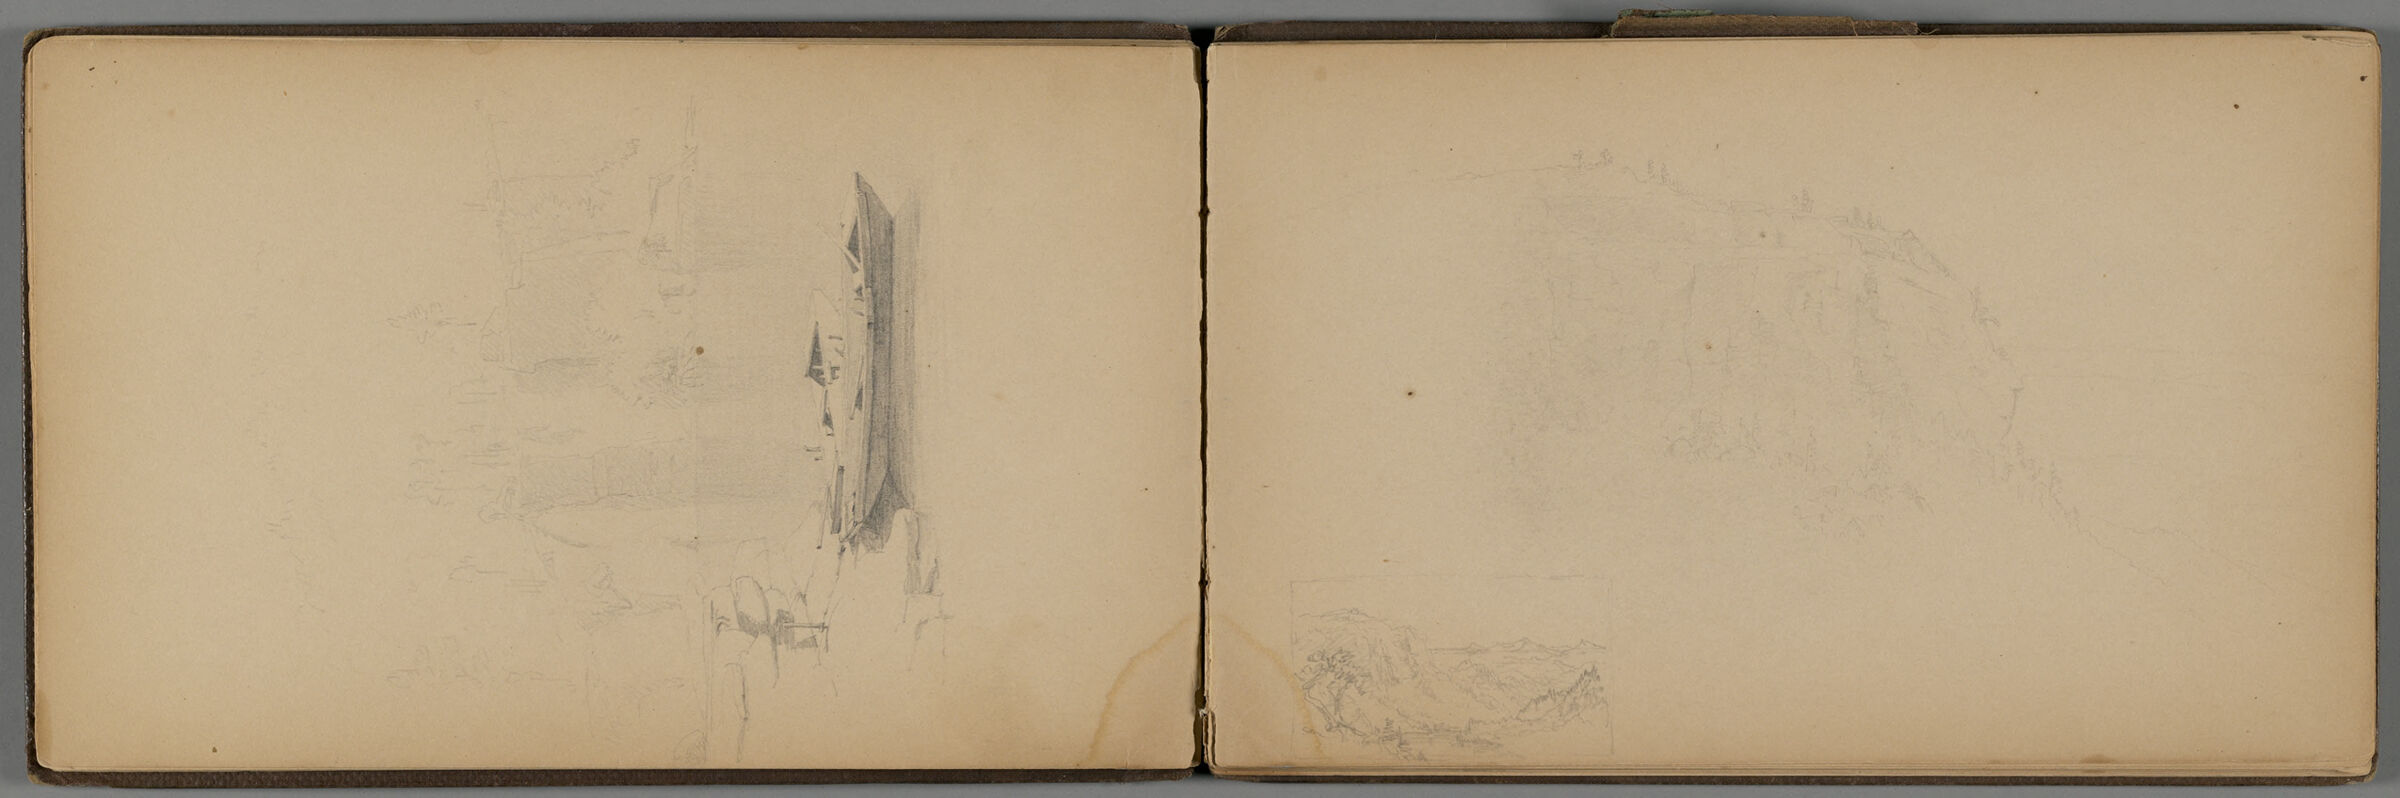 Two Landscapes; Verso: Cliff Scene With Figure